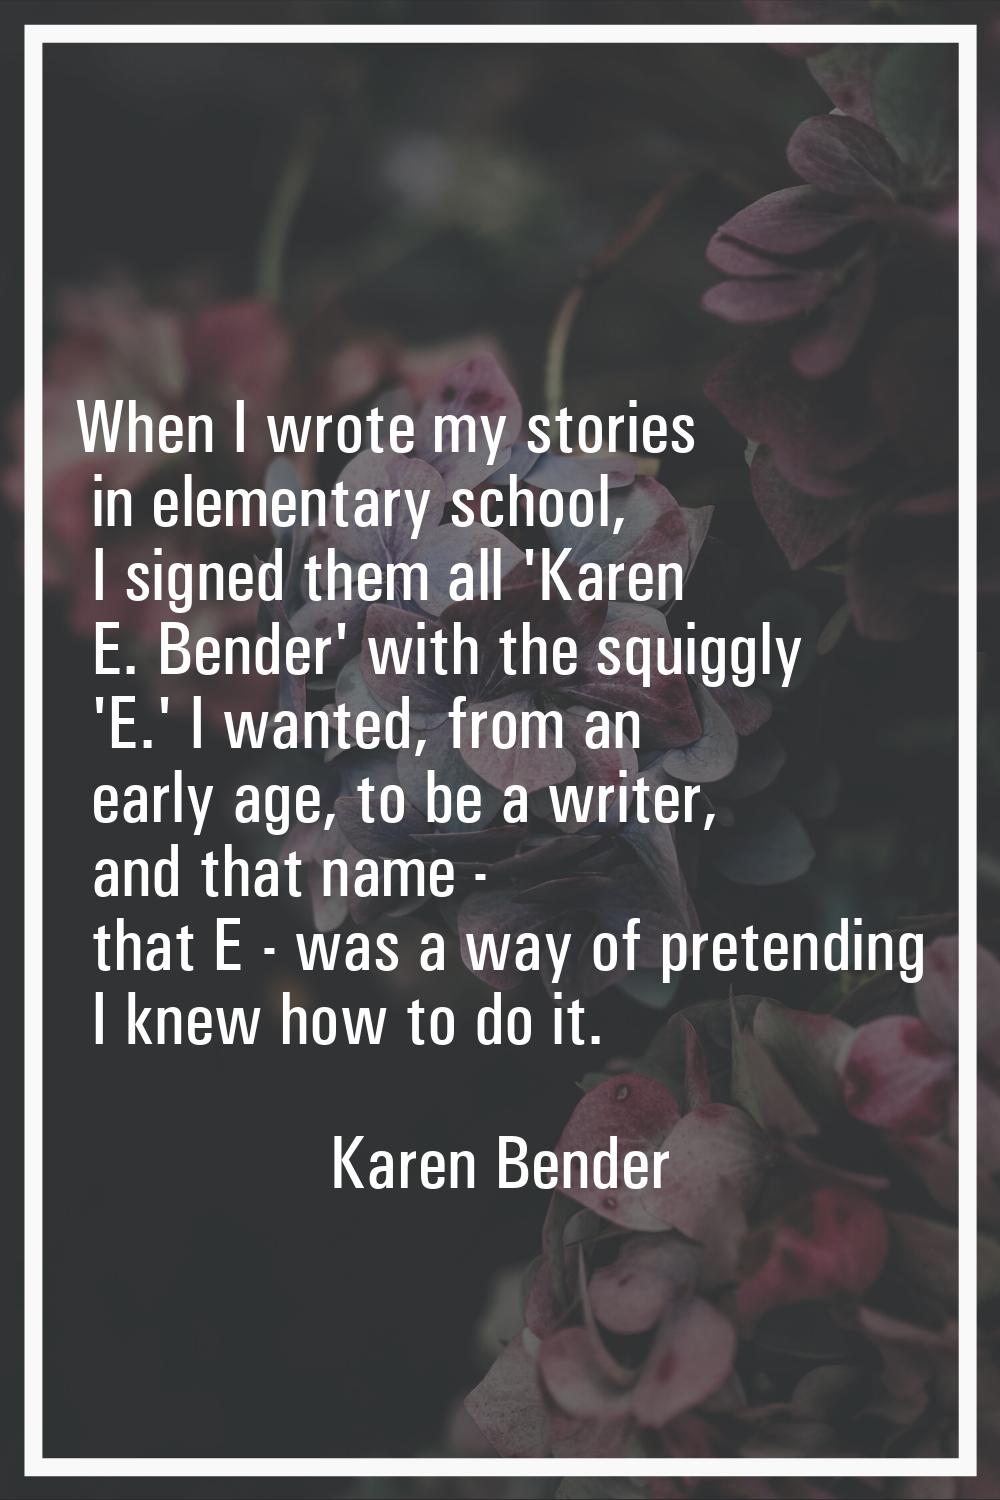 When I wrote my stories in elementary school, I signed them all 'Karen E. Bender' with the squiggly